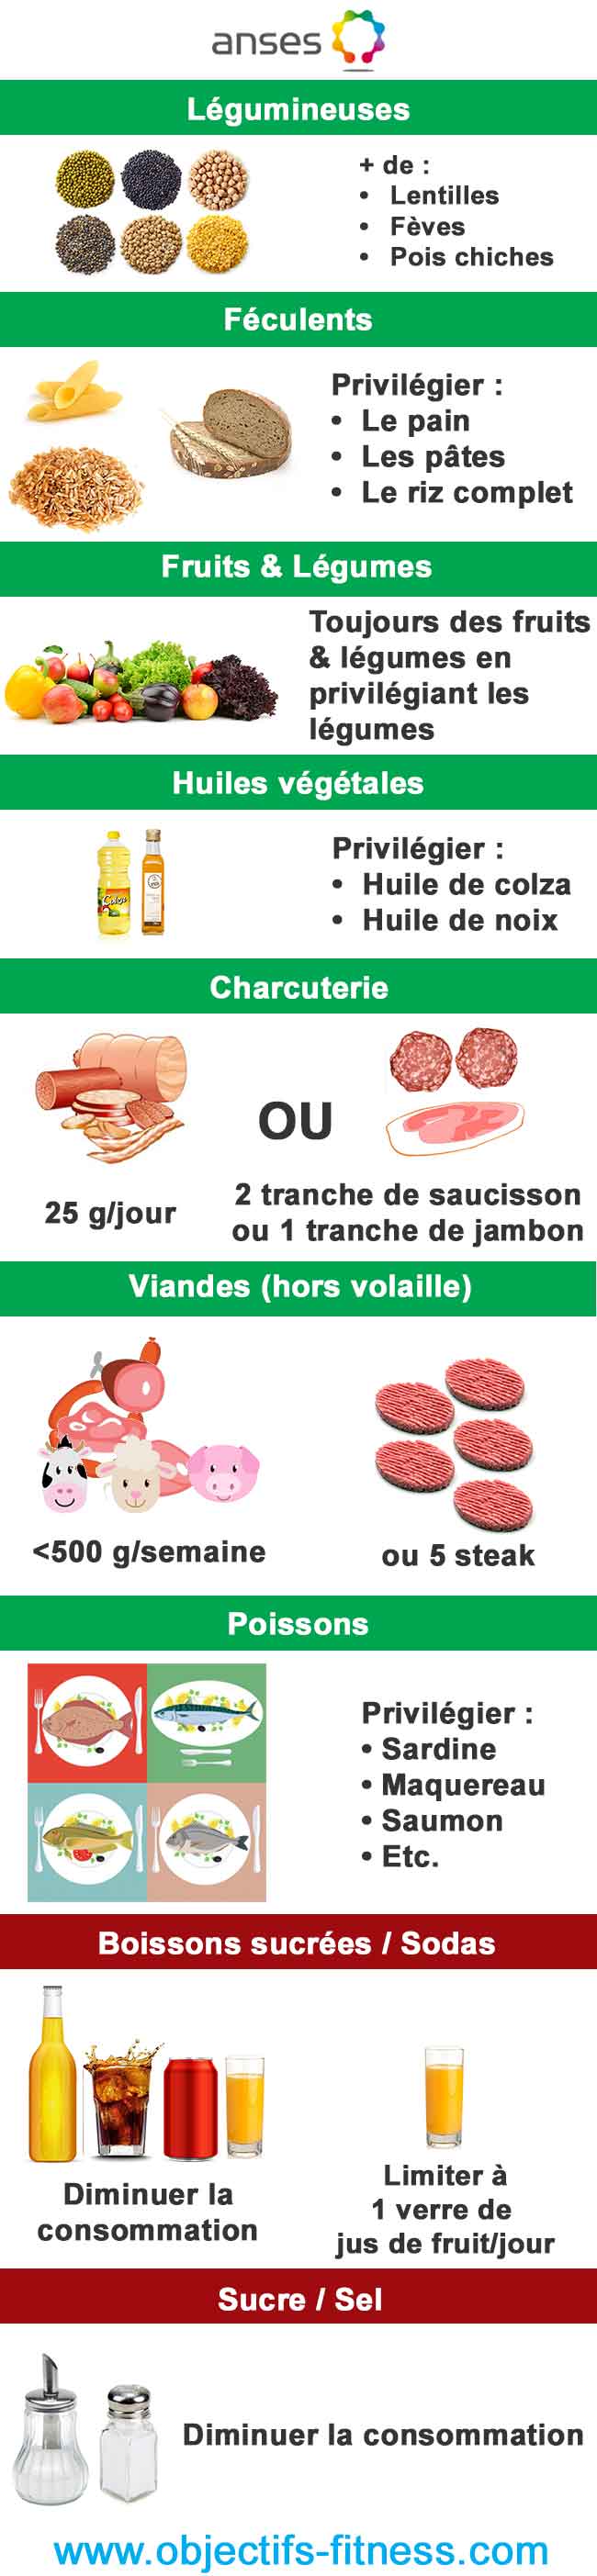 infographie-ANSES-recommandations-alimentaires